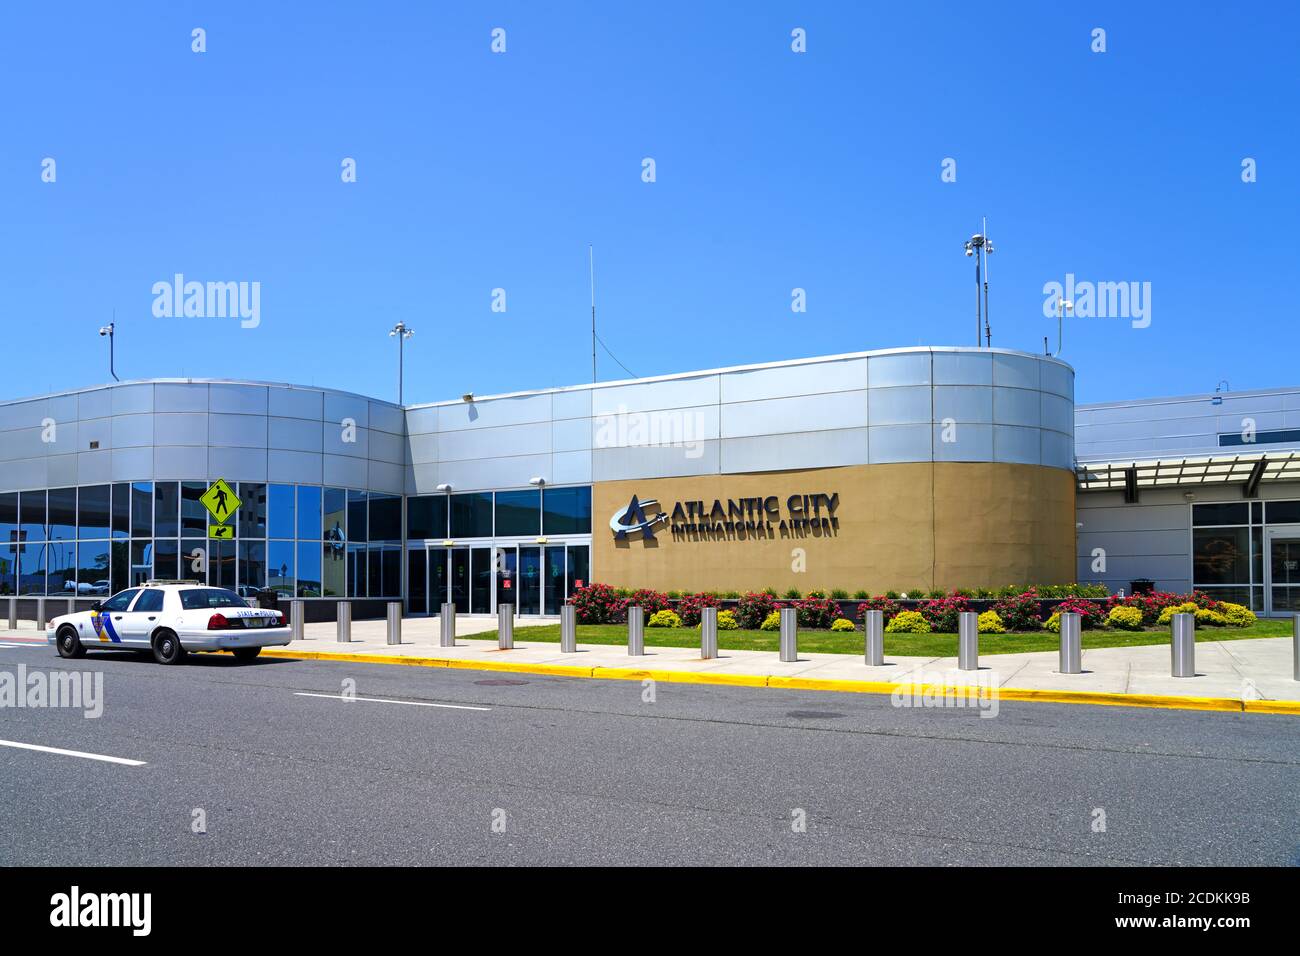 ATLANTIC CITY, NJ -21 JUL 2020- View of the Atlantic City International Airport (ACY) on the Jersey Shore in New Jersey, United States. Stock Photo